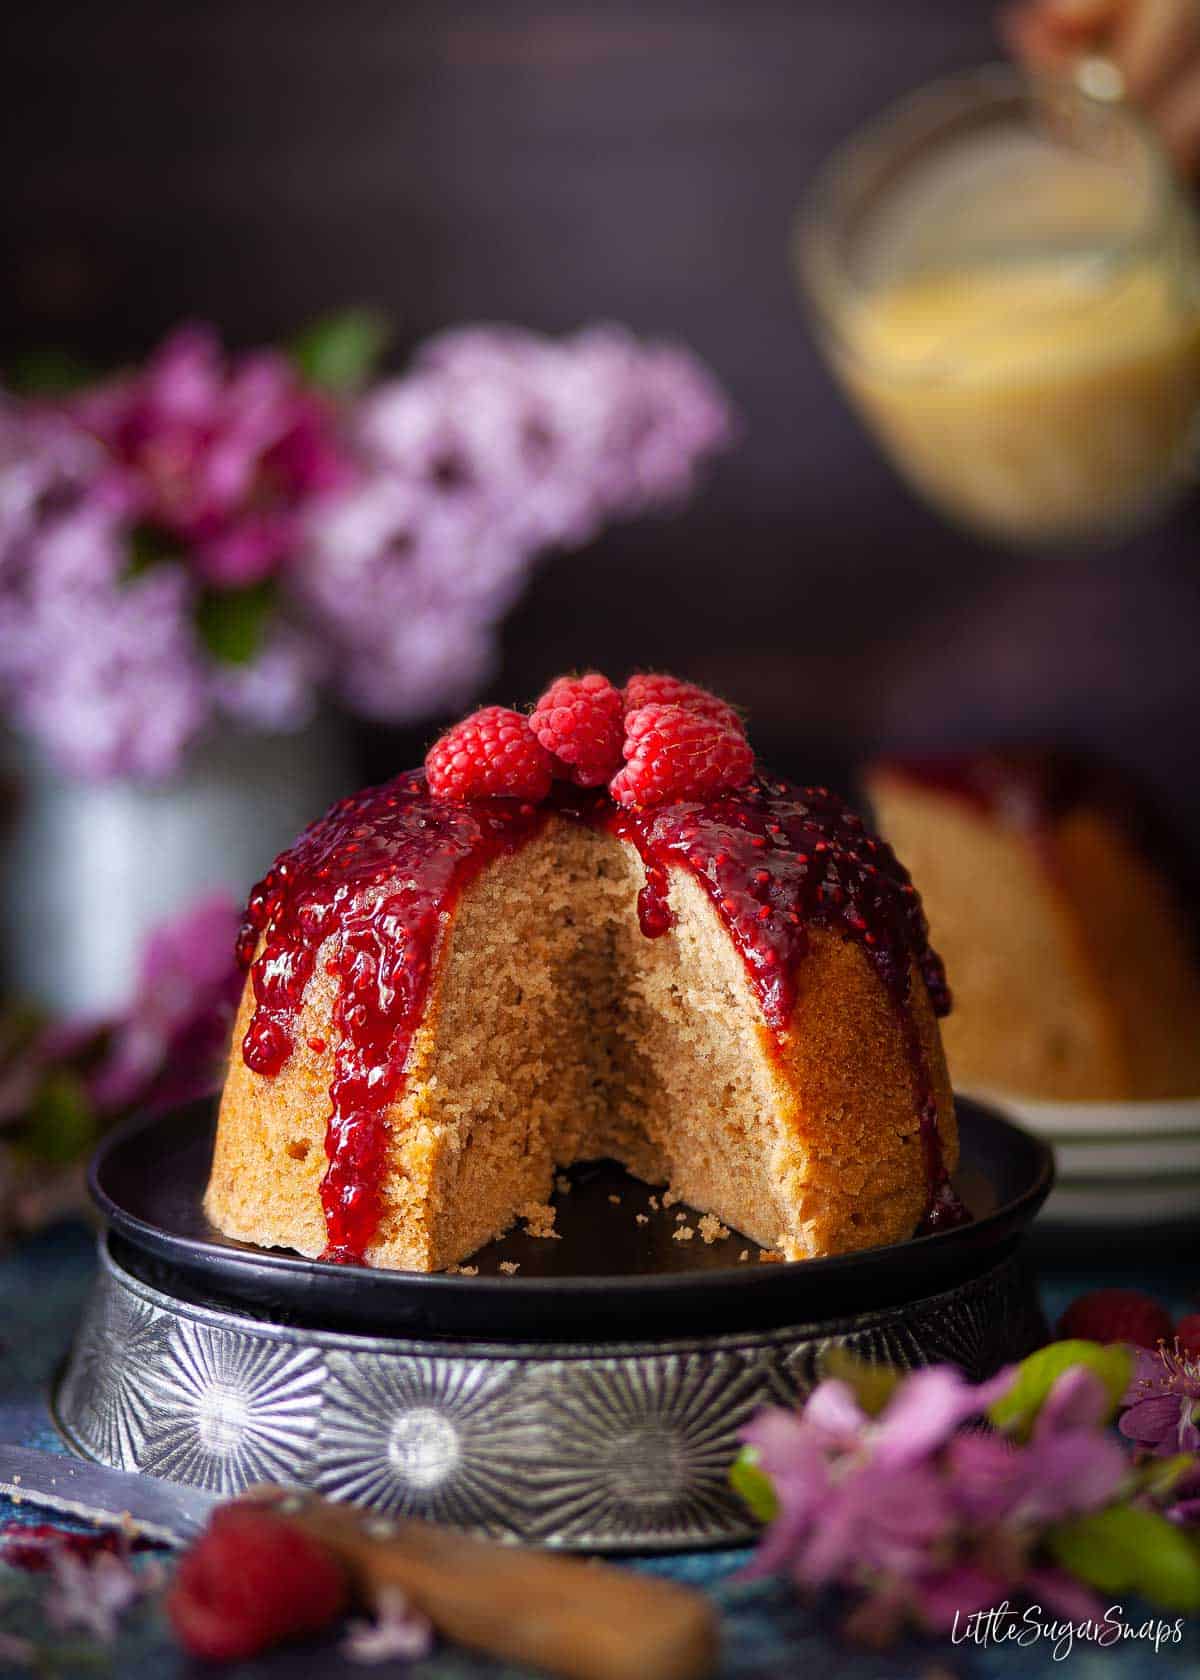 A steamed jam sponge pudding with a slice cut out of it.